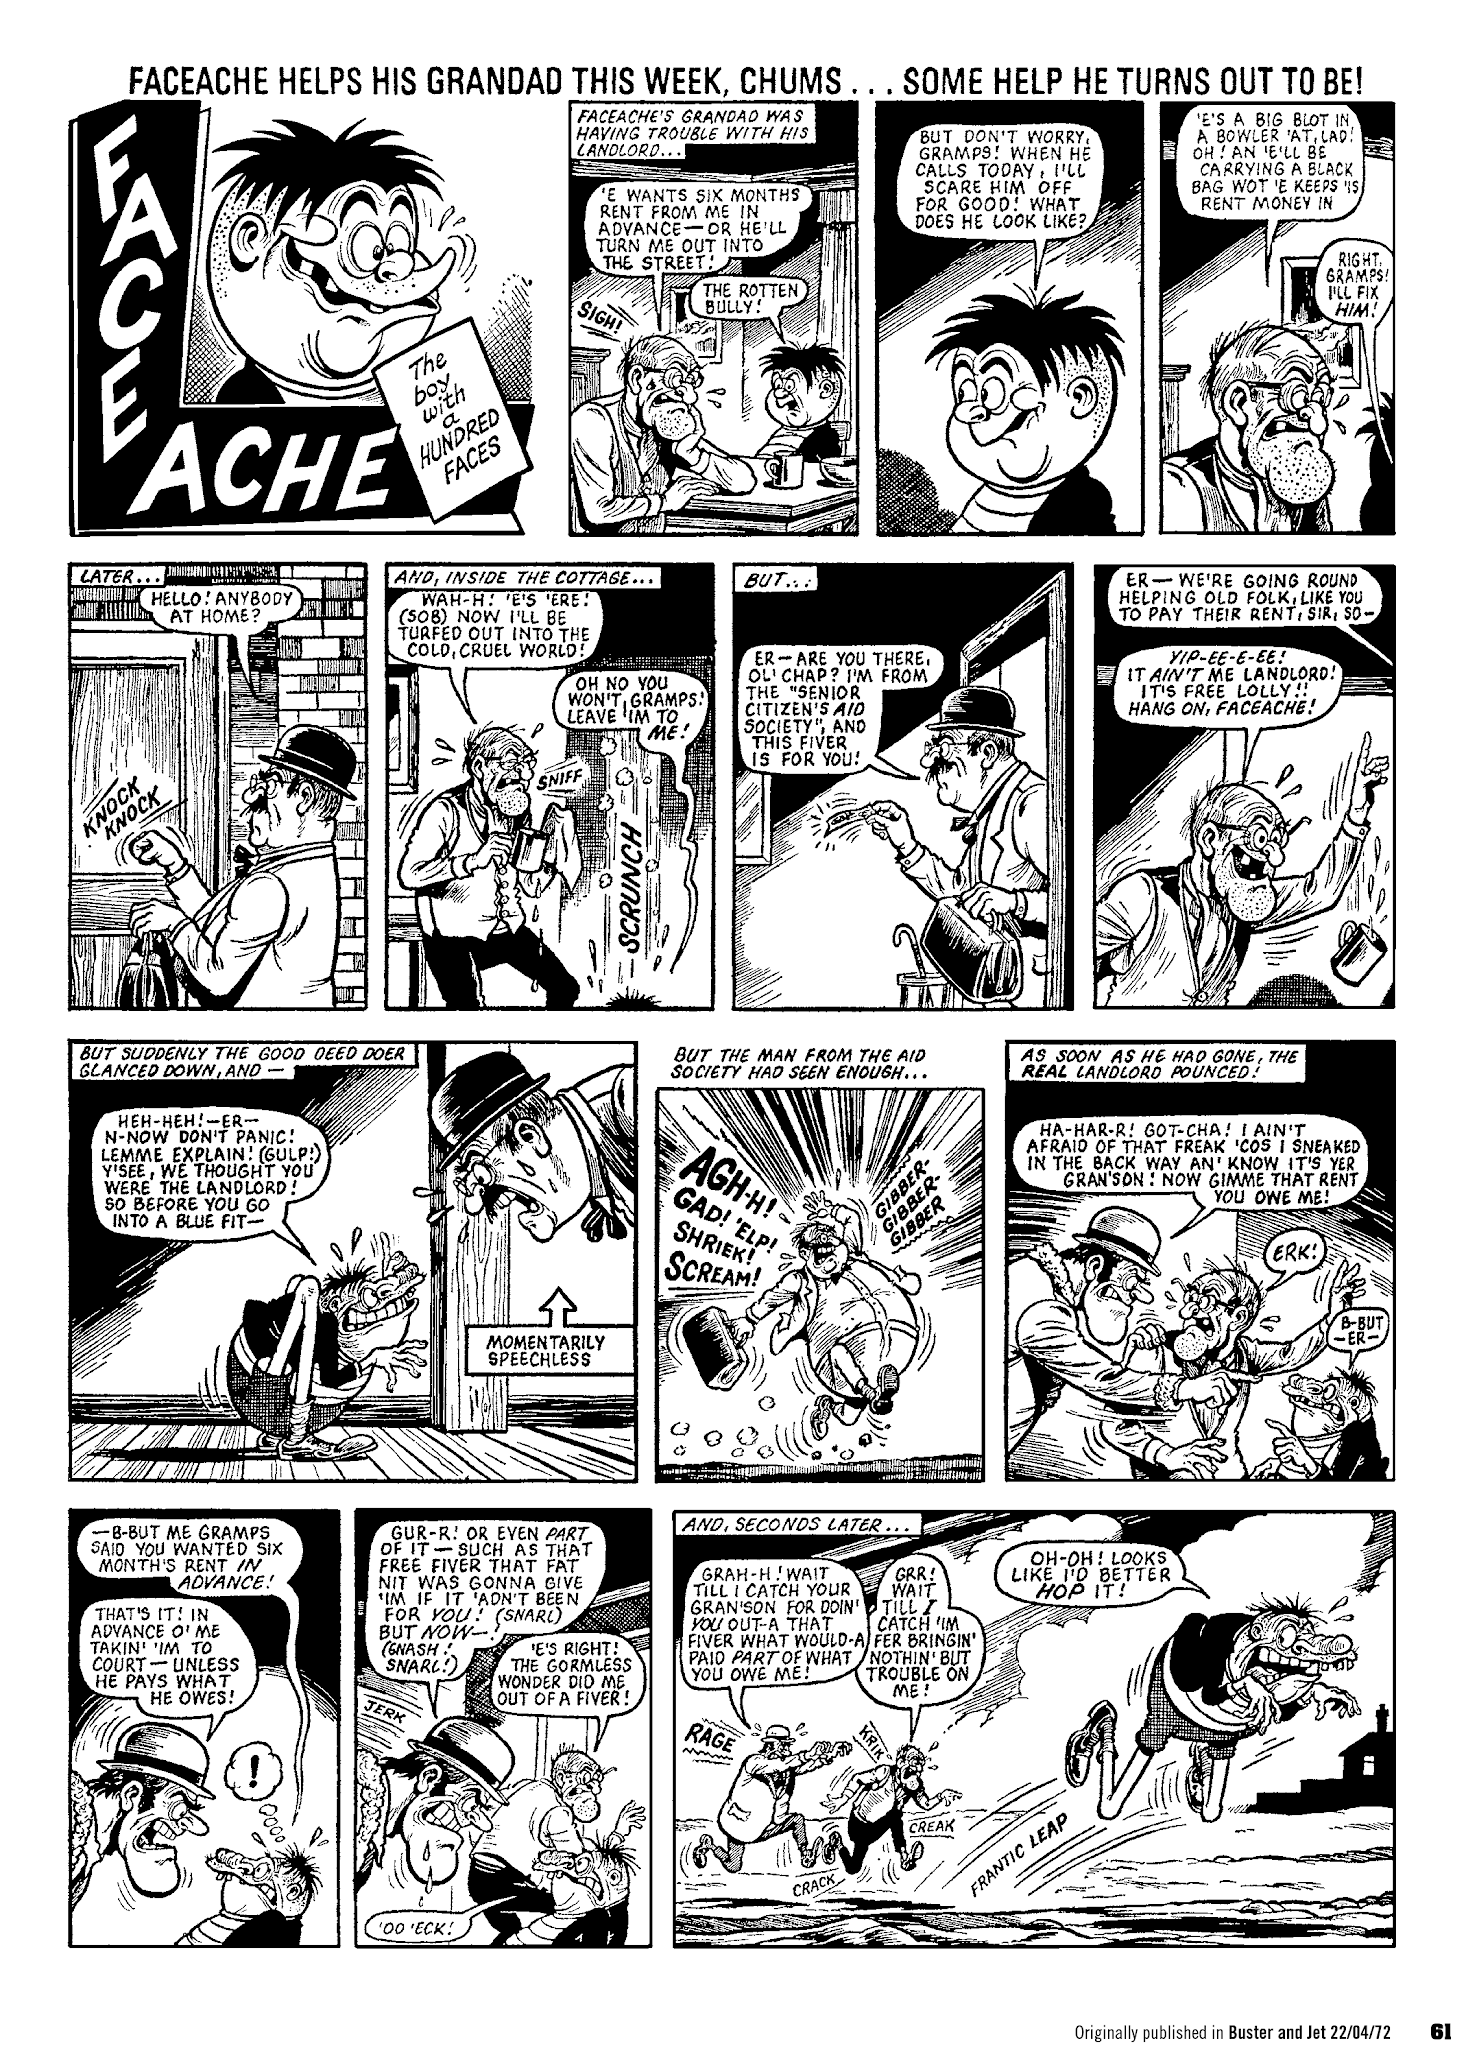 Read online Faceache: The First Hundred Scrunges comic -  Issue # TPB 1 - 63